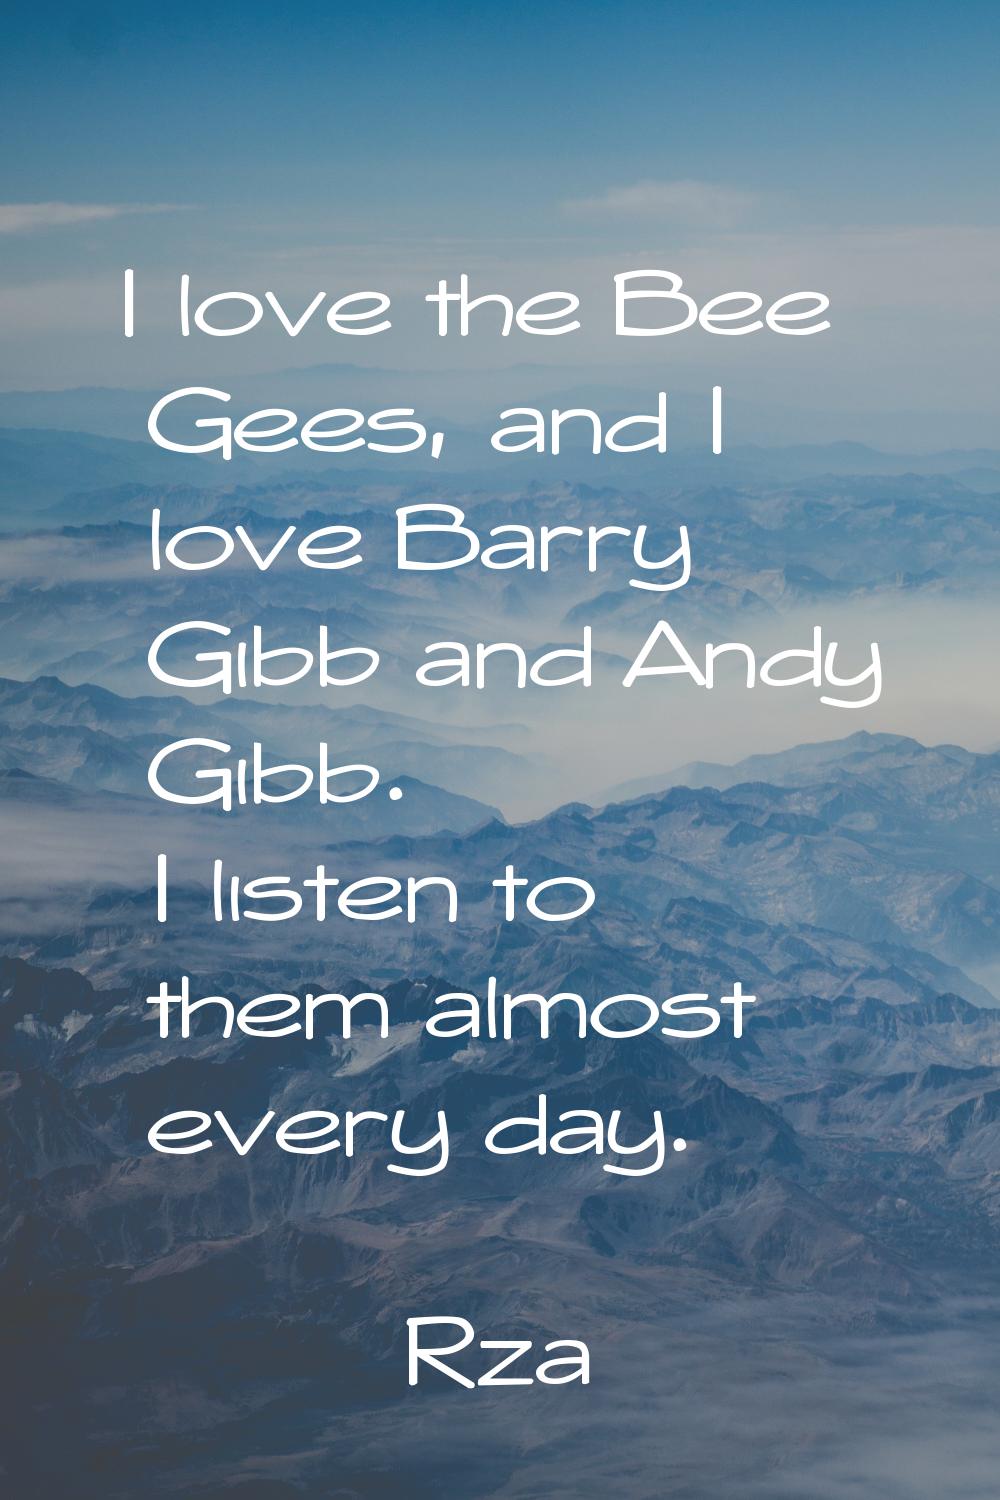 I love the Bee Gees, and I love Barry Gibb and Andy Gibb. I listen to them almost every day.